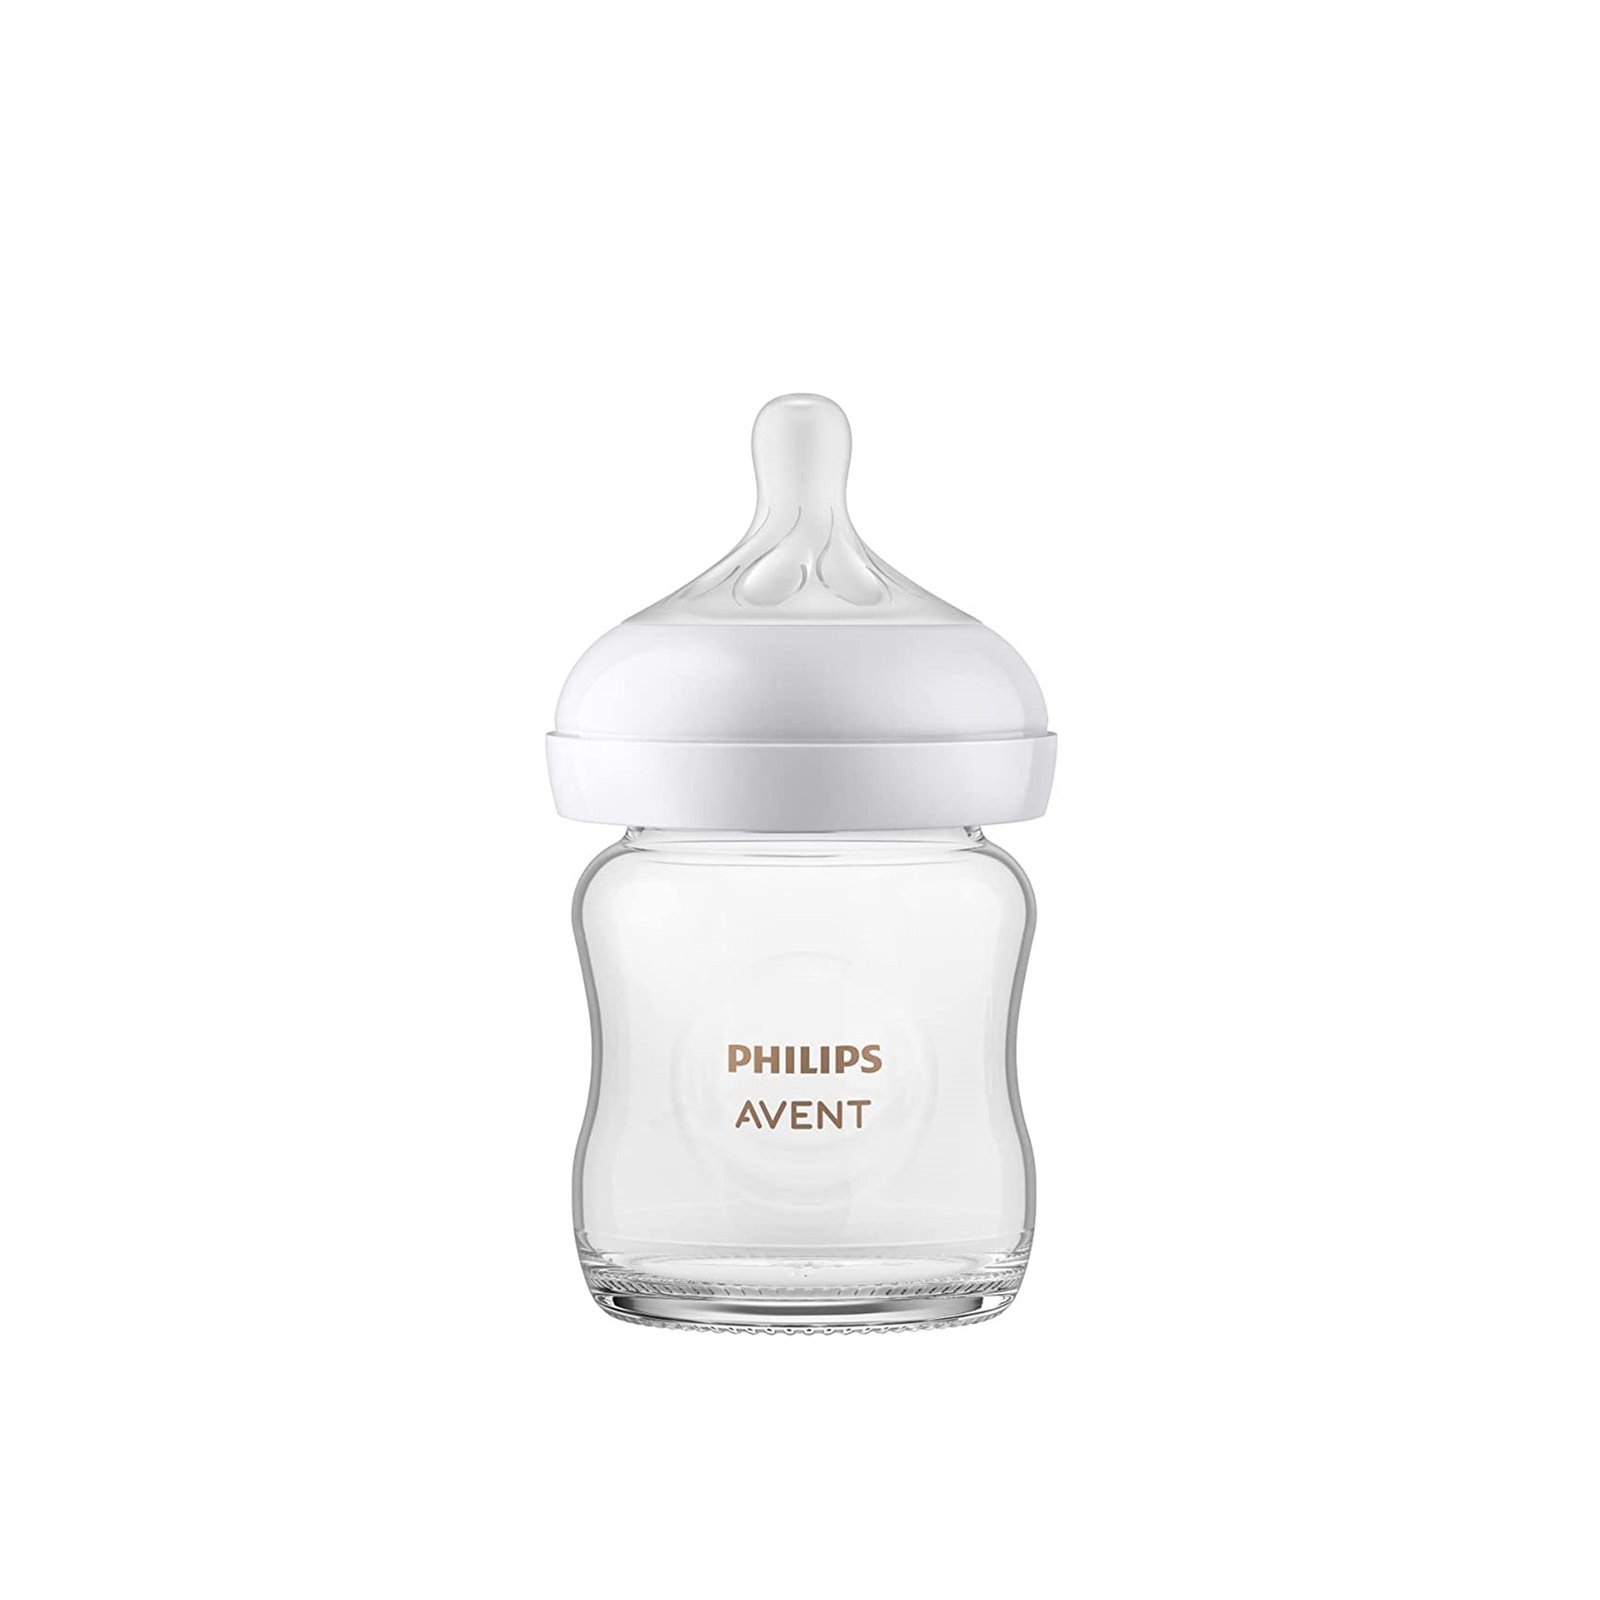 https://static.beautytocare.com/cdn-cgi/image/width=1600,height=1600,f=auto/media/catalog/product//p/h/philips-avent-natural-response-glass-baby-bottle-0m-120ml.jpg